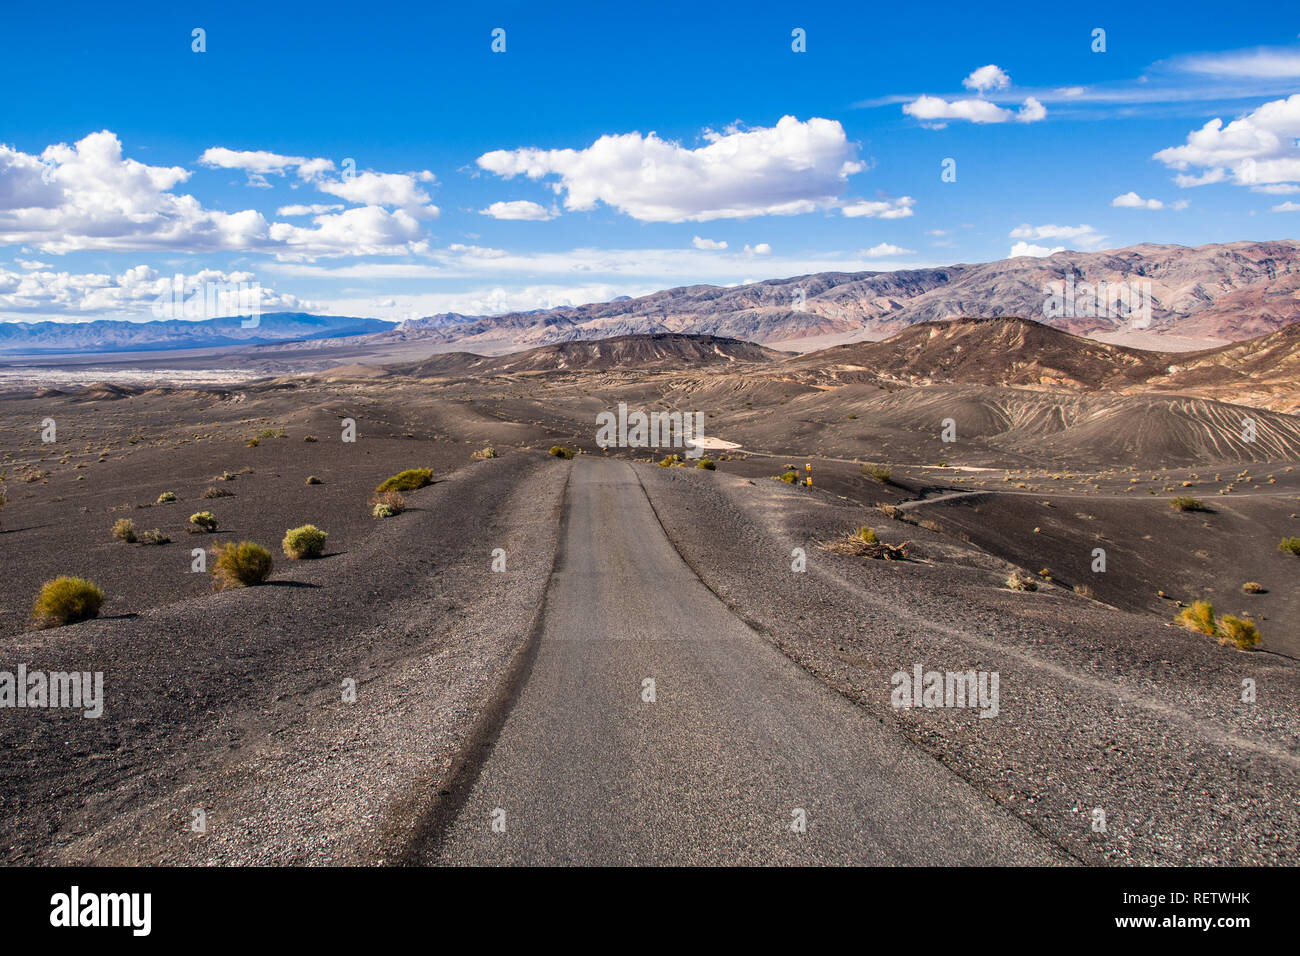 Travelling on an unpaved road through a remote area of Death Valley National Park; Ubehebe crater area in the background; California Stock Photo